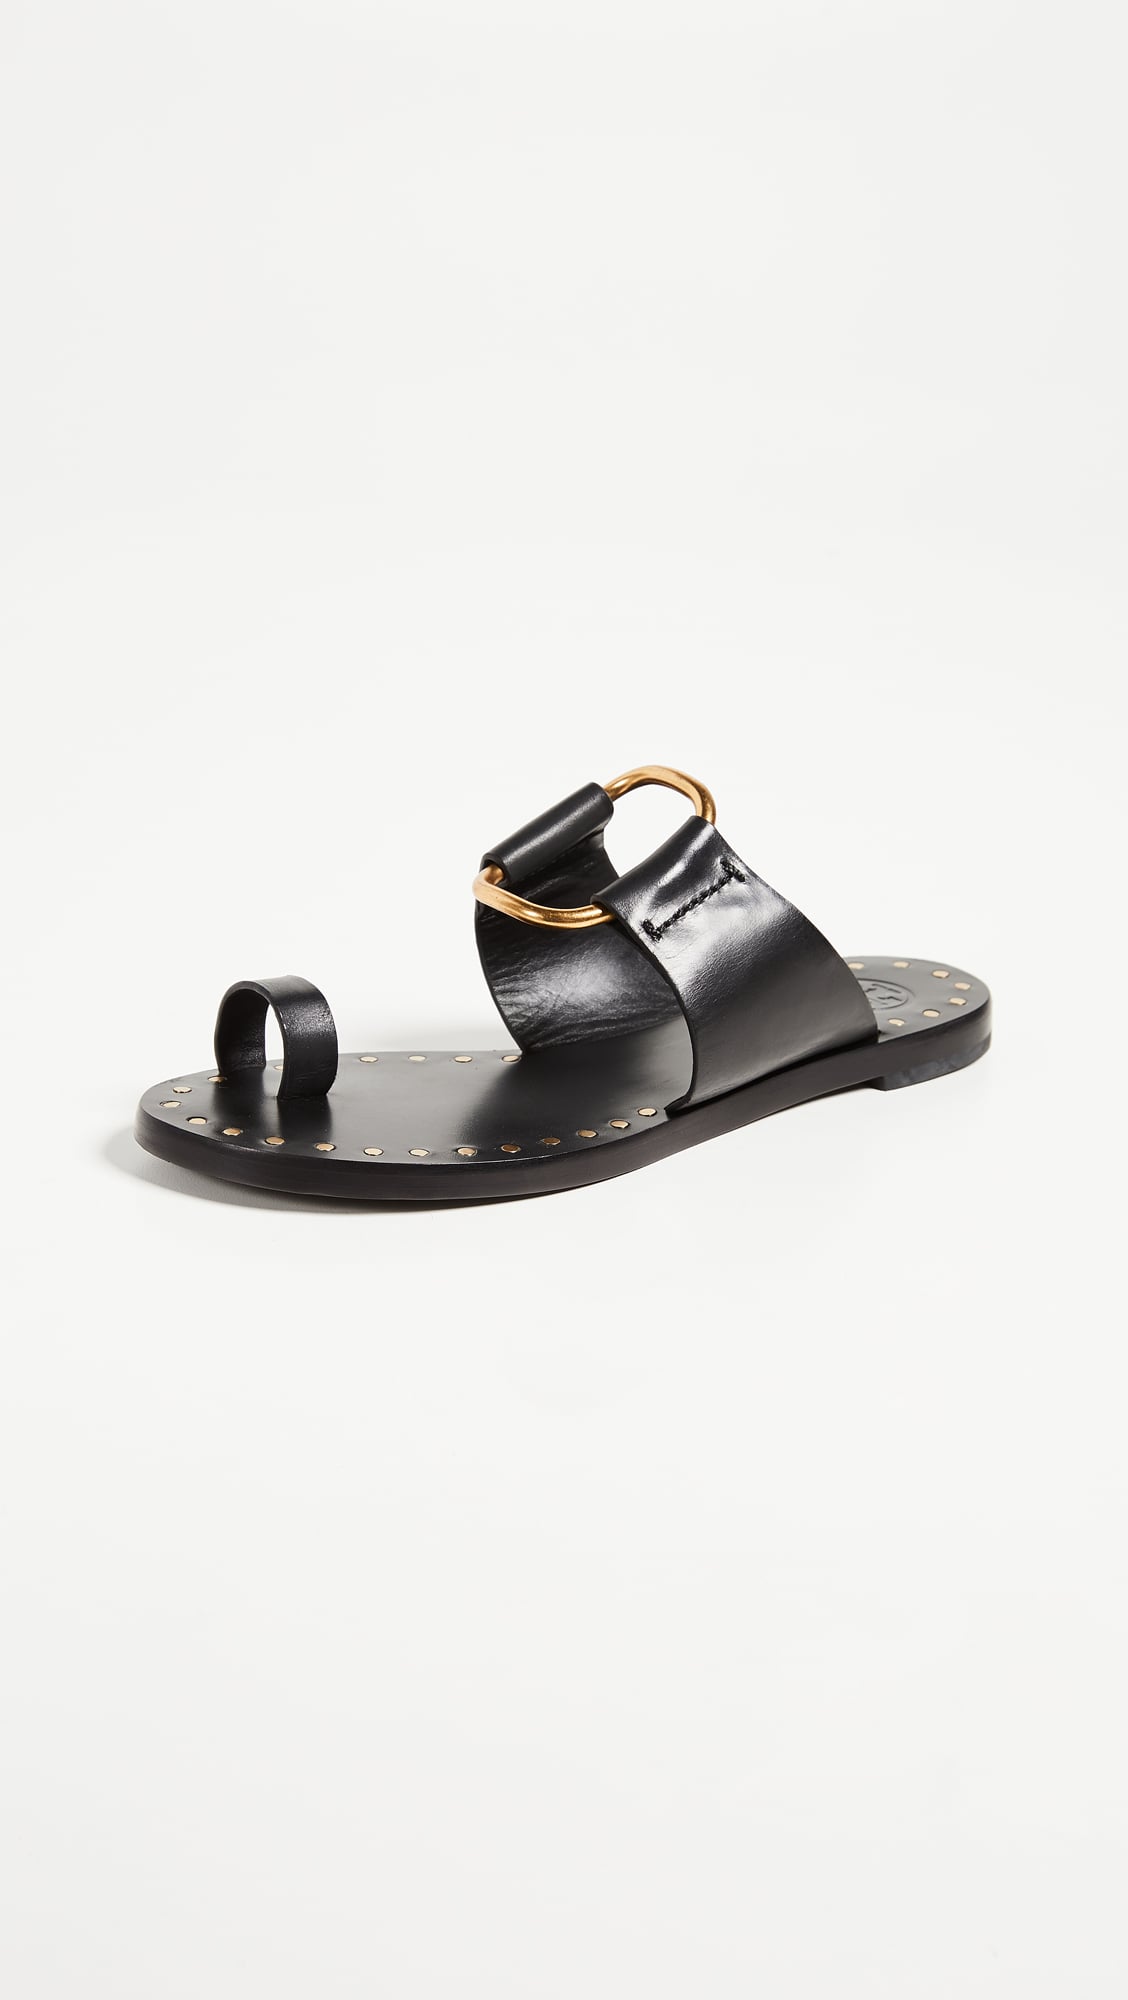 Tory Burch Brannan Toe Ring Sandals | Jennifer Aniston's Vacation Shoes  Have 1 Chic Twist That Brings in All the Compliments | POPSUGAR Fashion  Photo 10